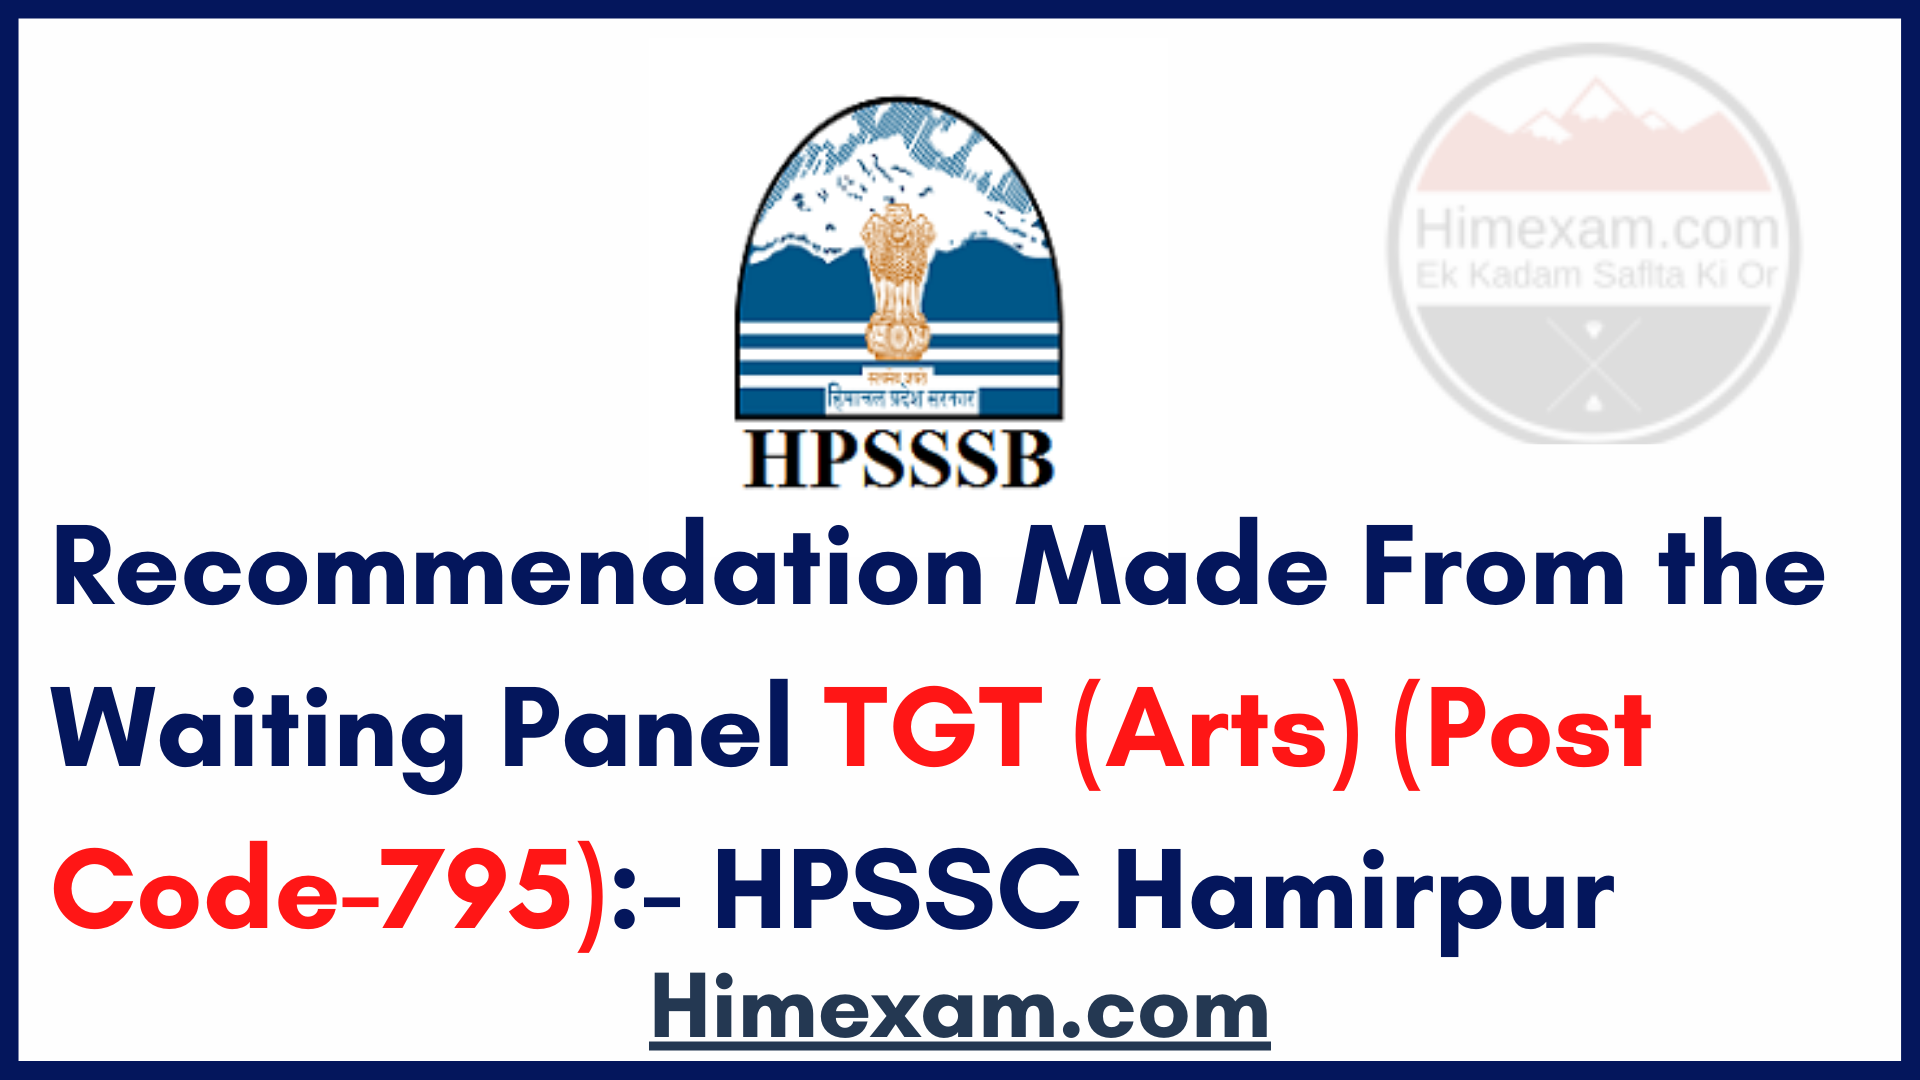 Recommendation Made From the Waiting Panel TGT (Arts) (Post Code-795):- HPSSC Hamirpur